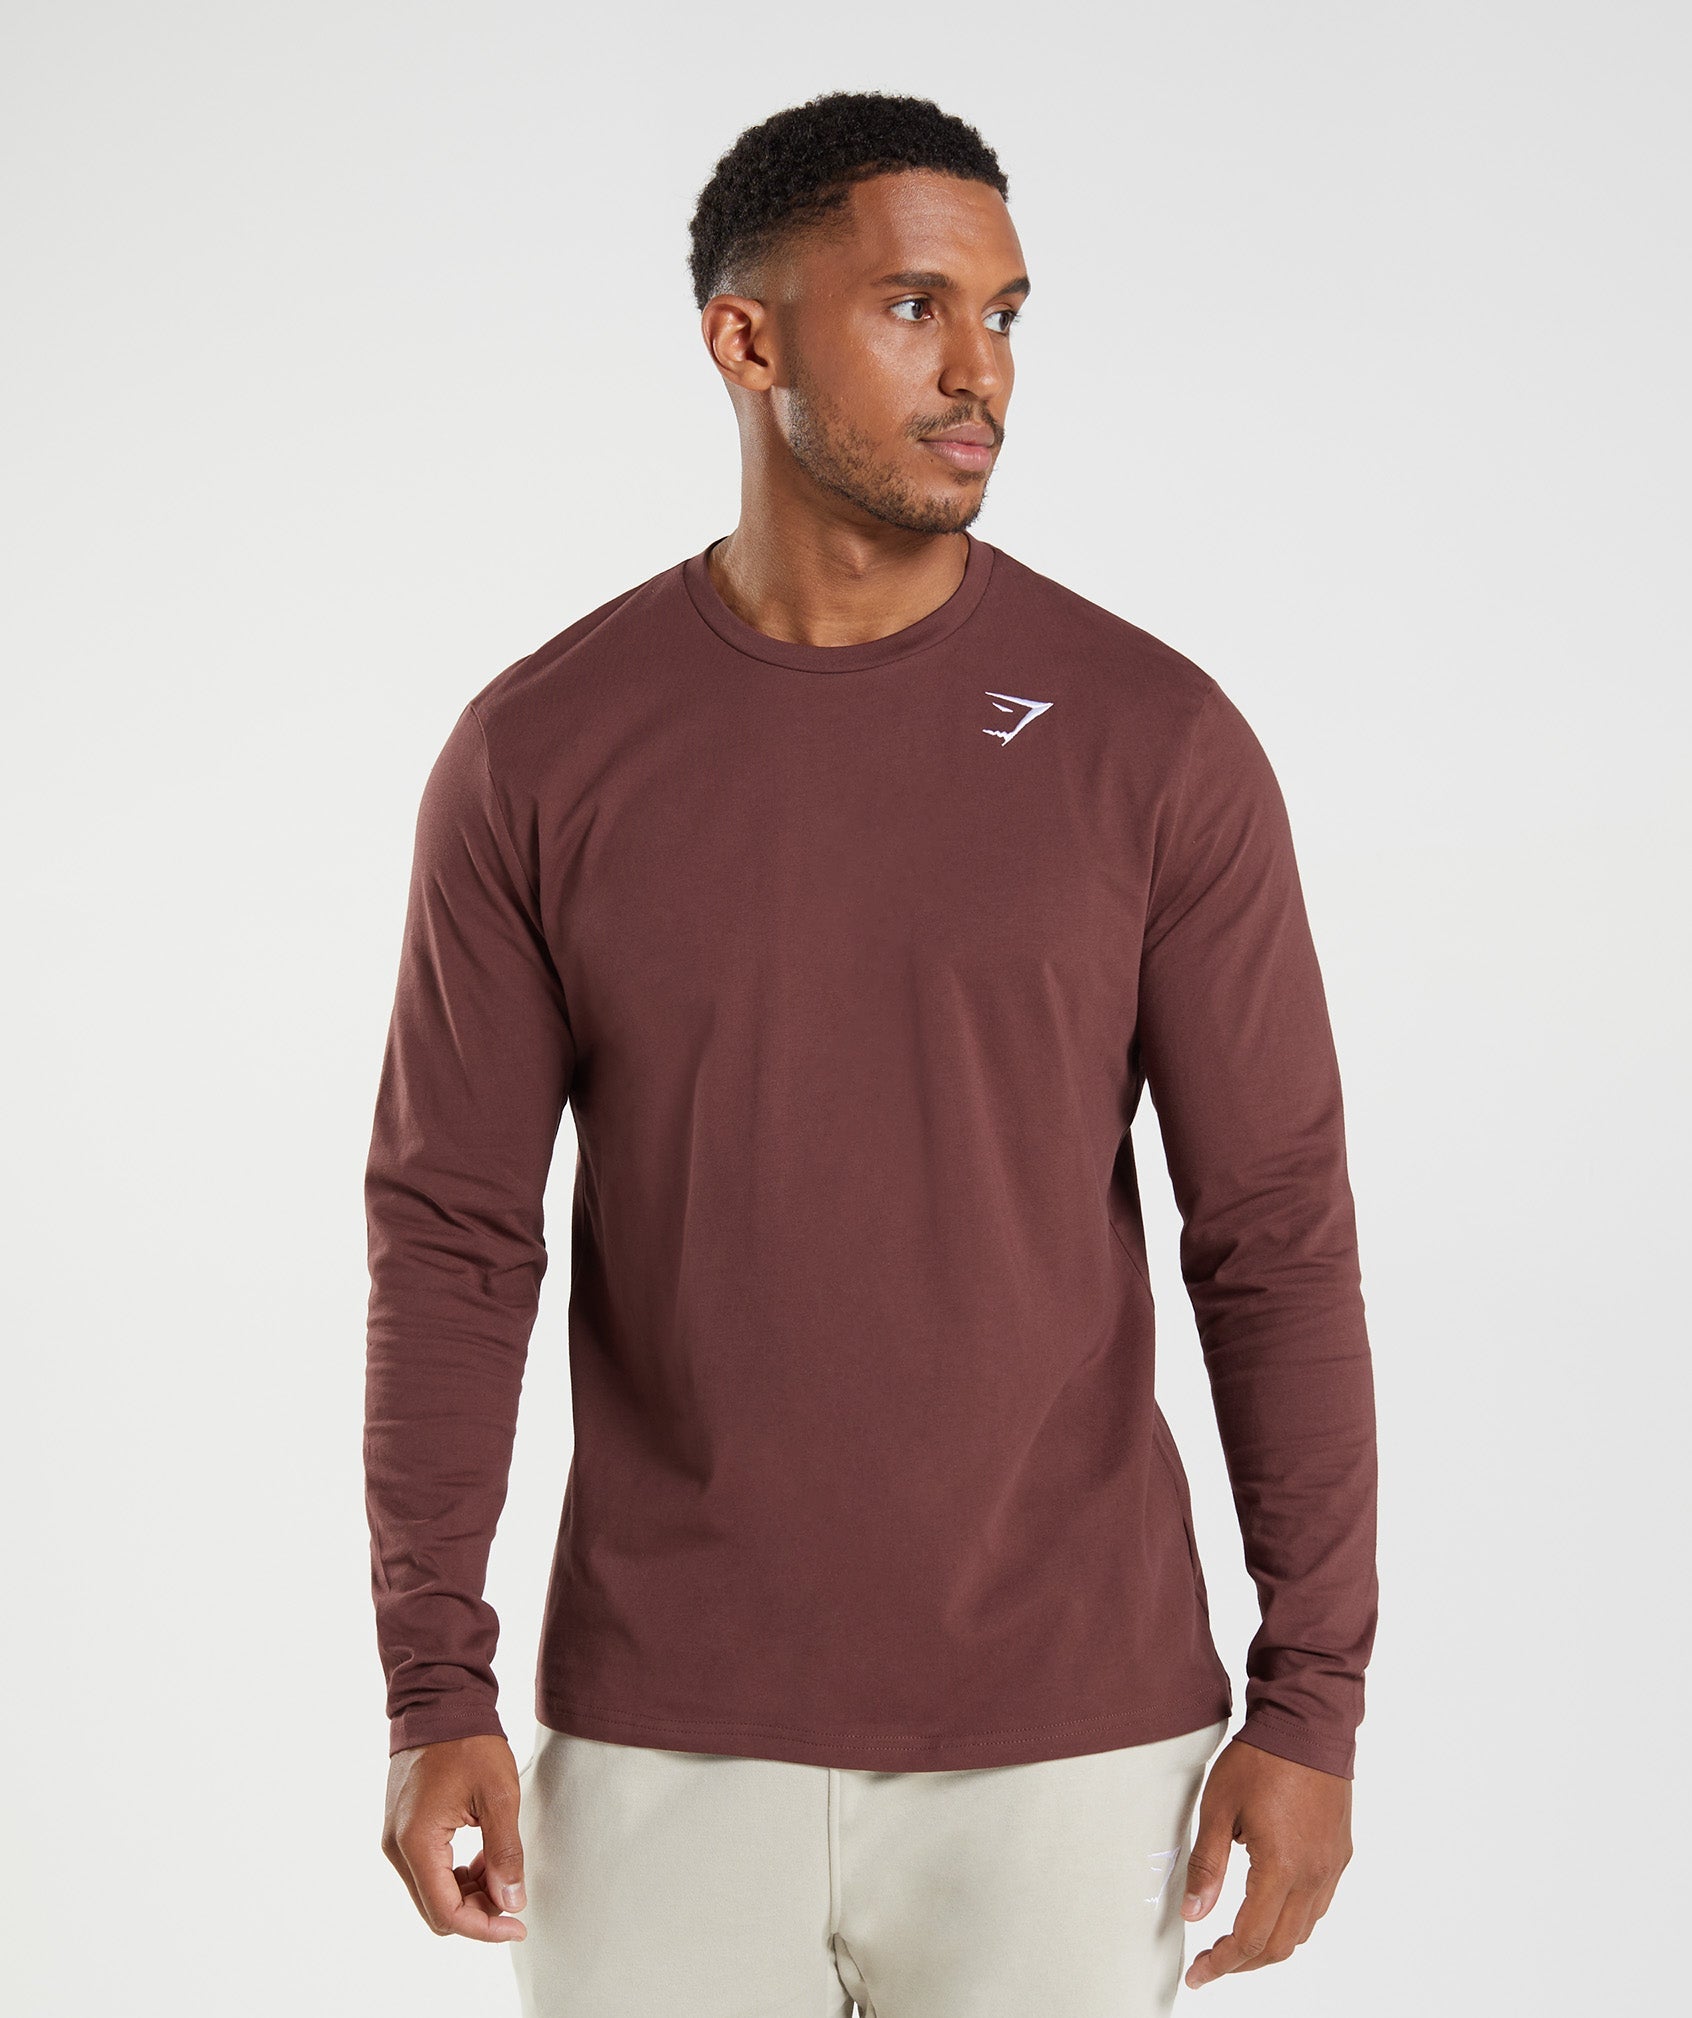 Crest Long Sleeve T-Shirt in Cherry Brown